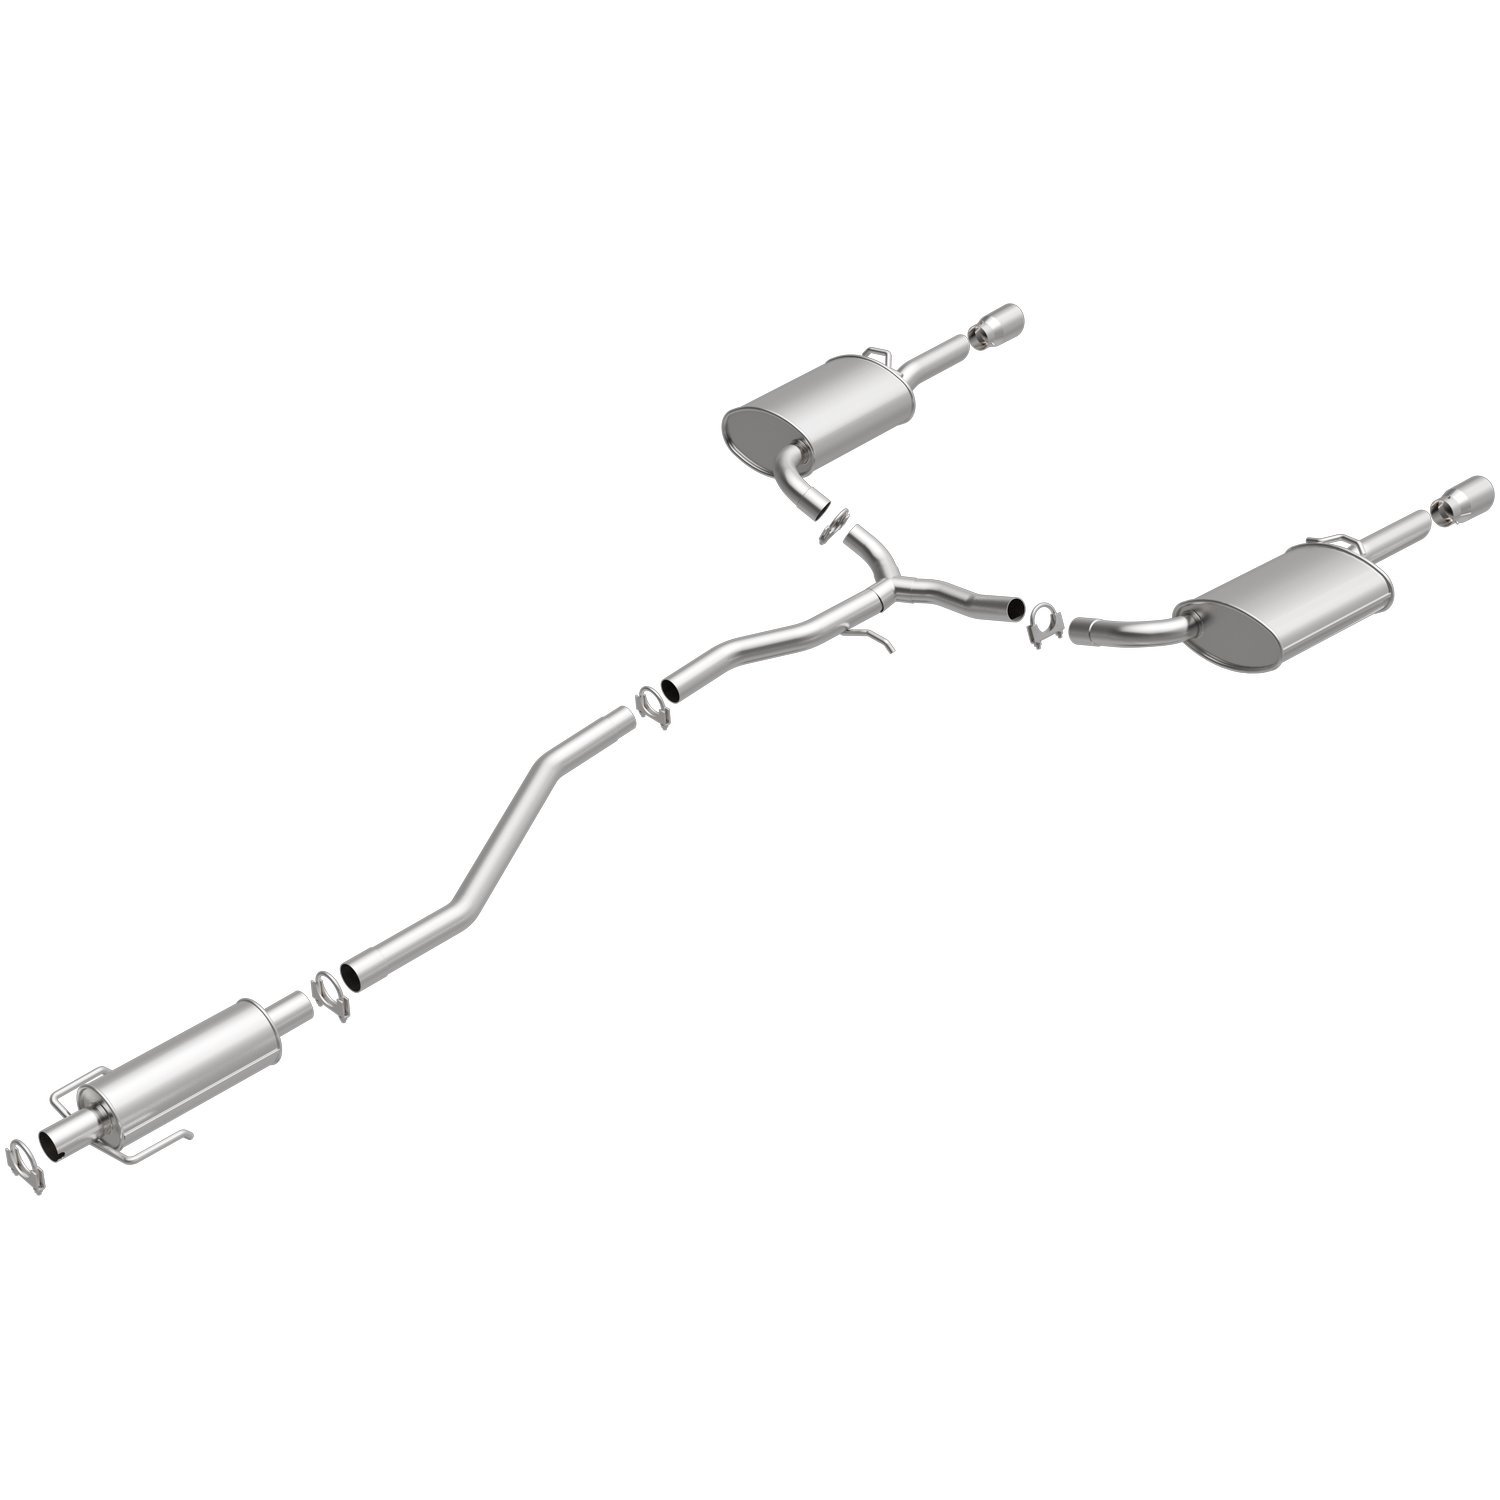 Direct-Fit Exhaust Kit, 2006-2012 Ford Fusion, Mecury Milan MKZ